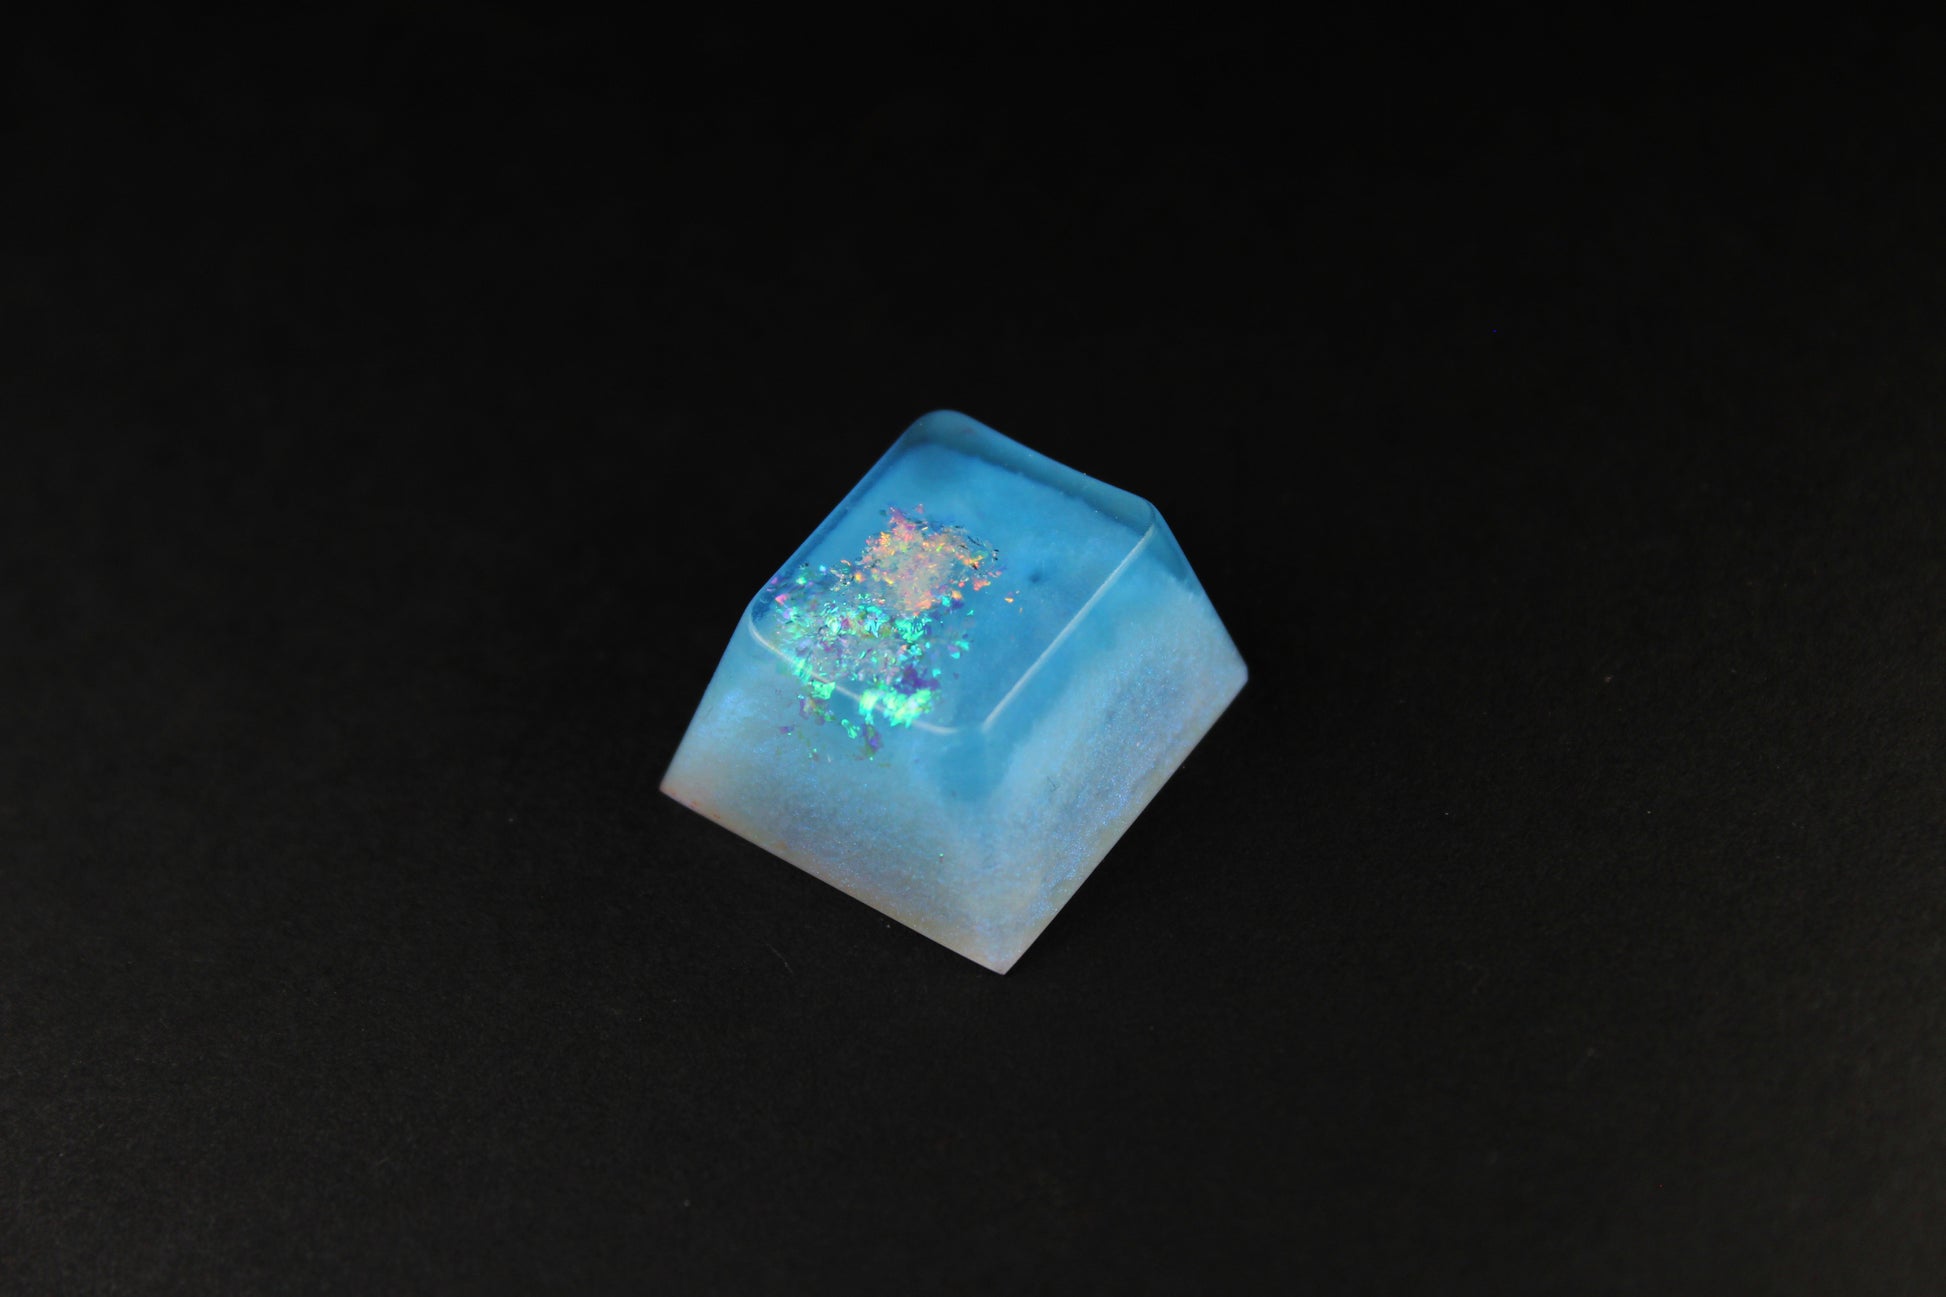 Cherry Esc - Glacial Ice 2 - PrimeCaps Keycap - Blank and Sculpted Artisan Keycaps for cherry MX mechanical keyboards 